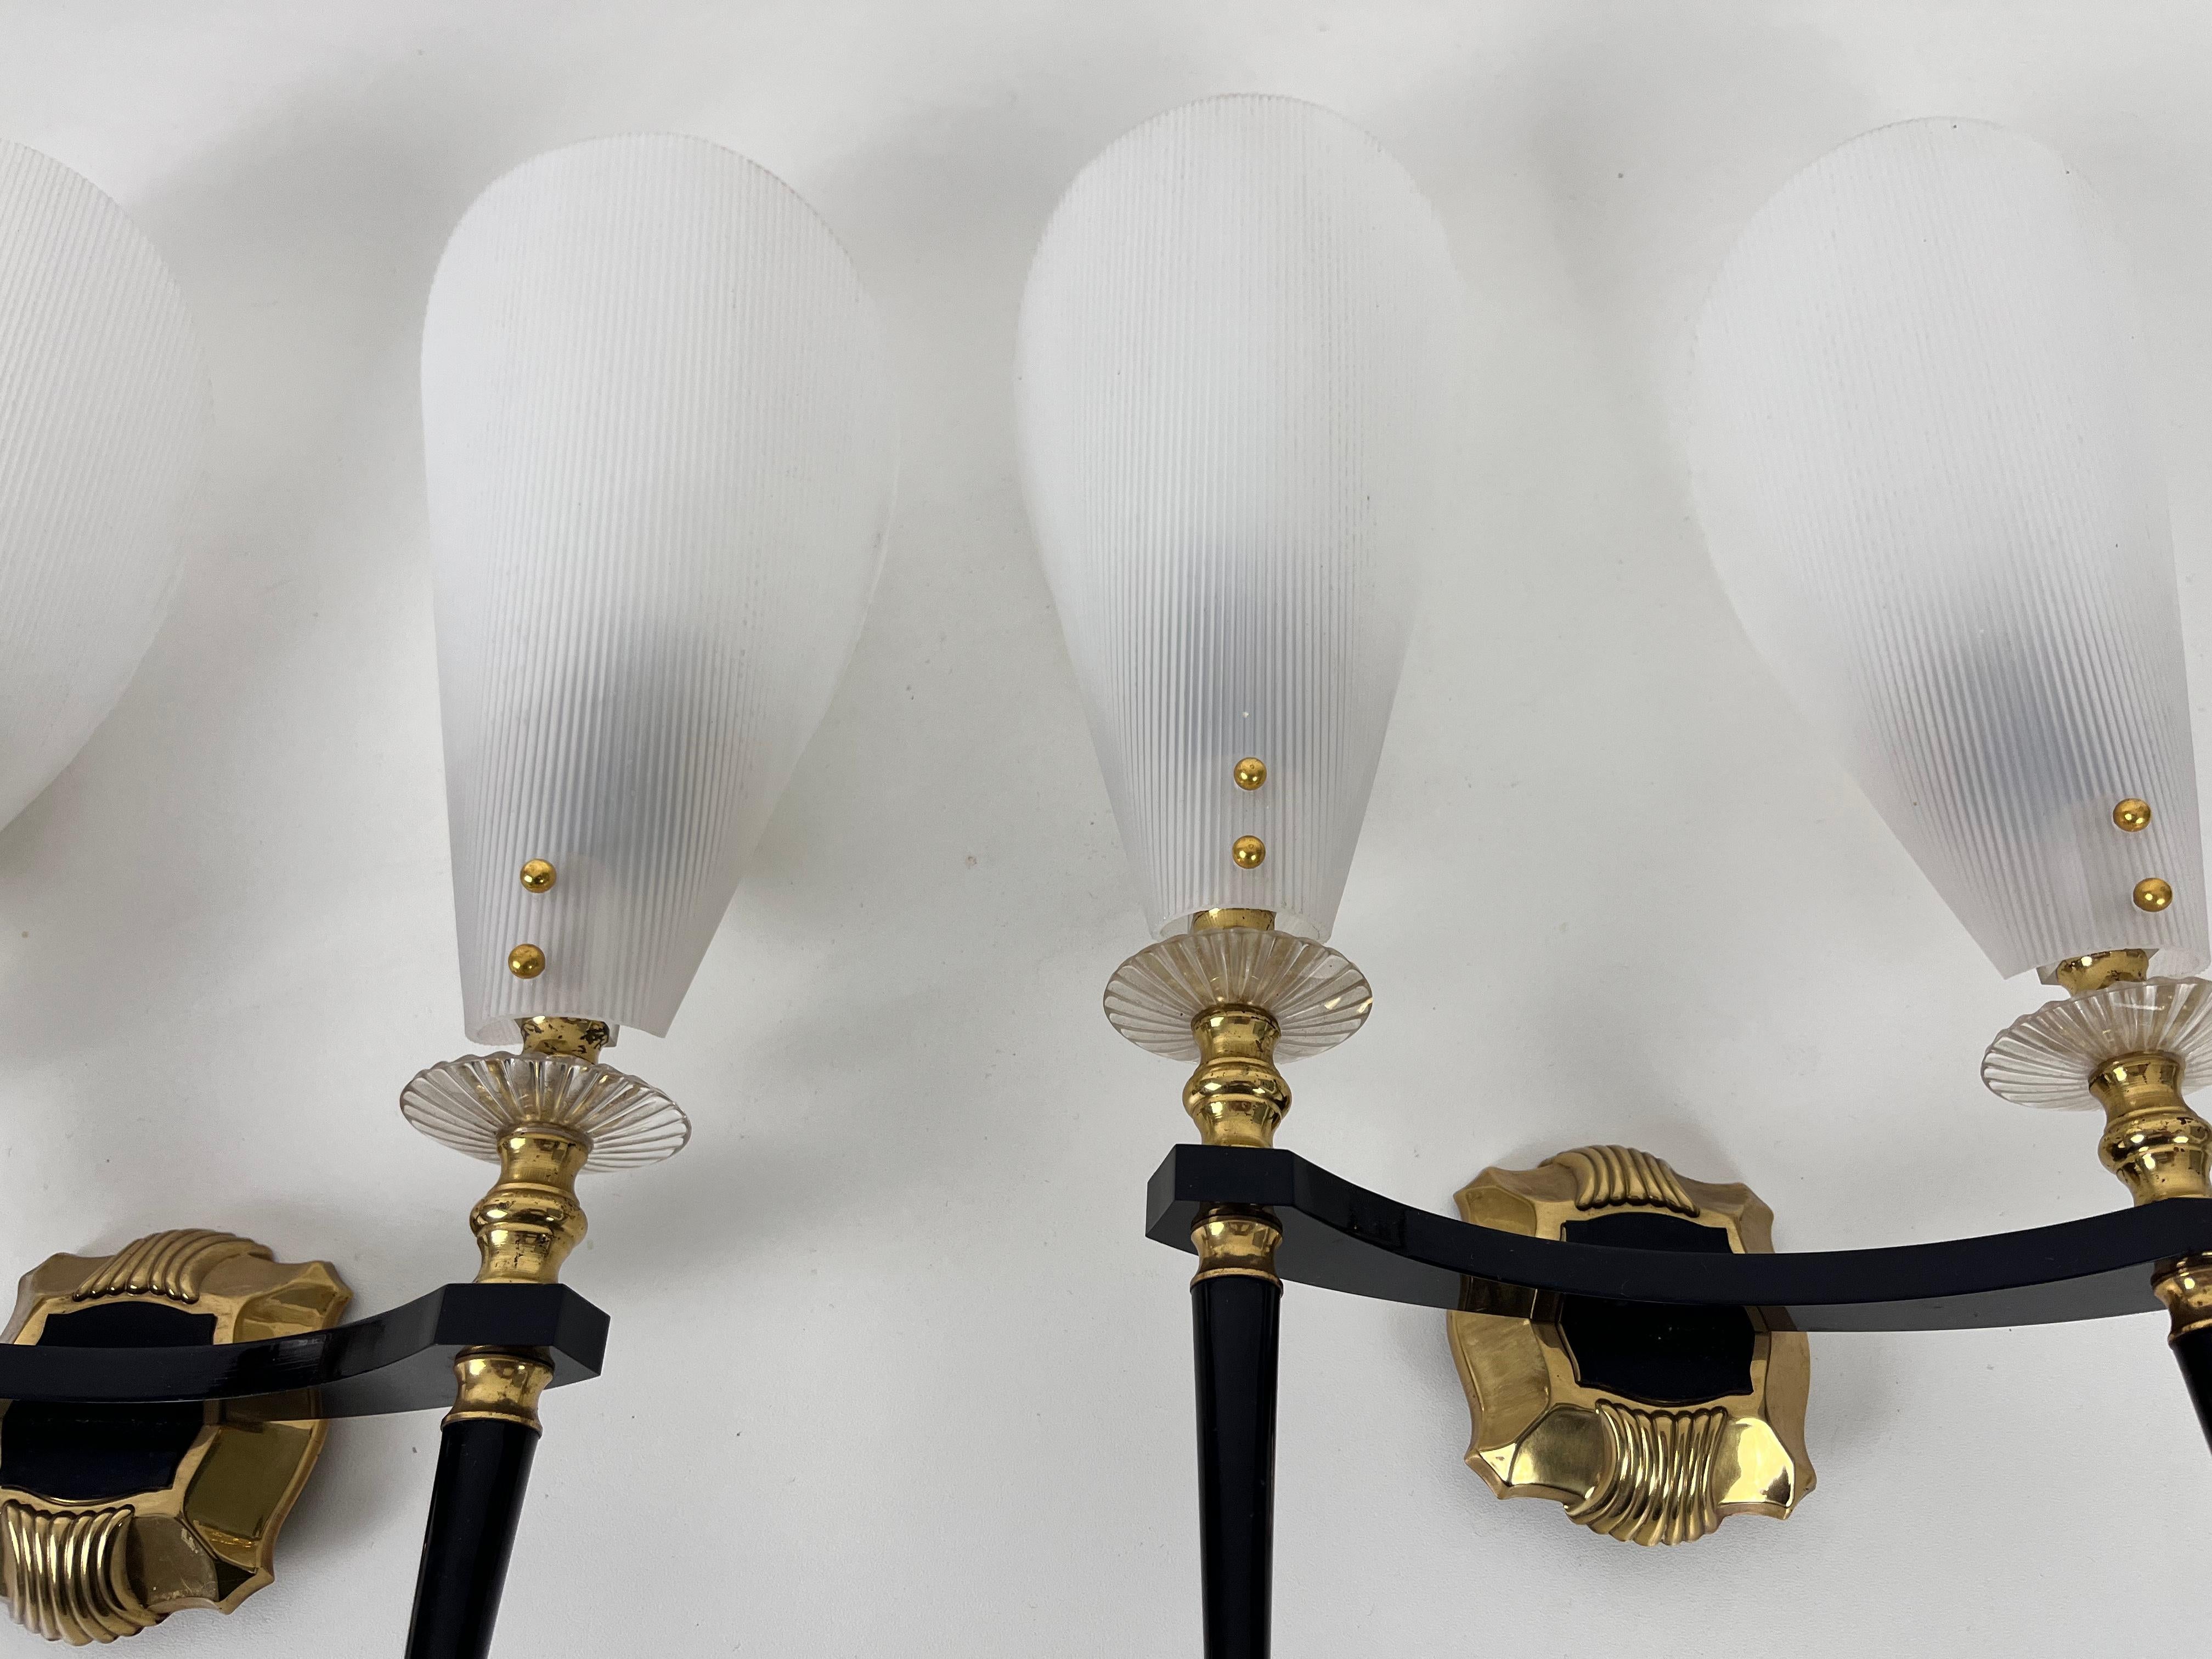 Pair of 2 Brass and Plexiglass Wall Lamps by Maison Arlus, 1960, France For Sale 4